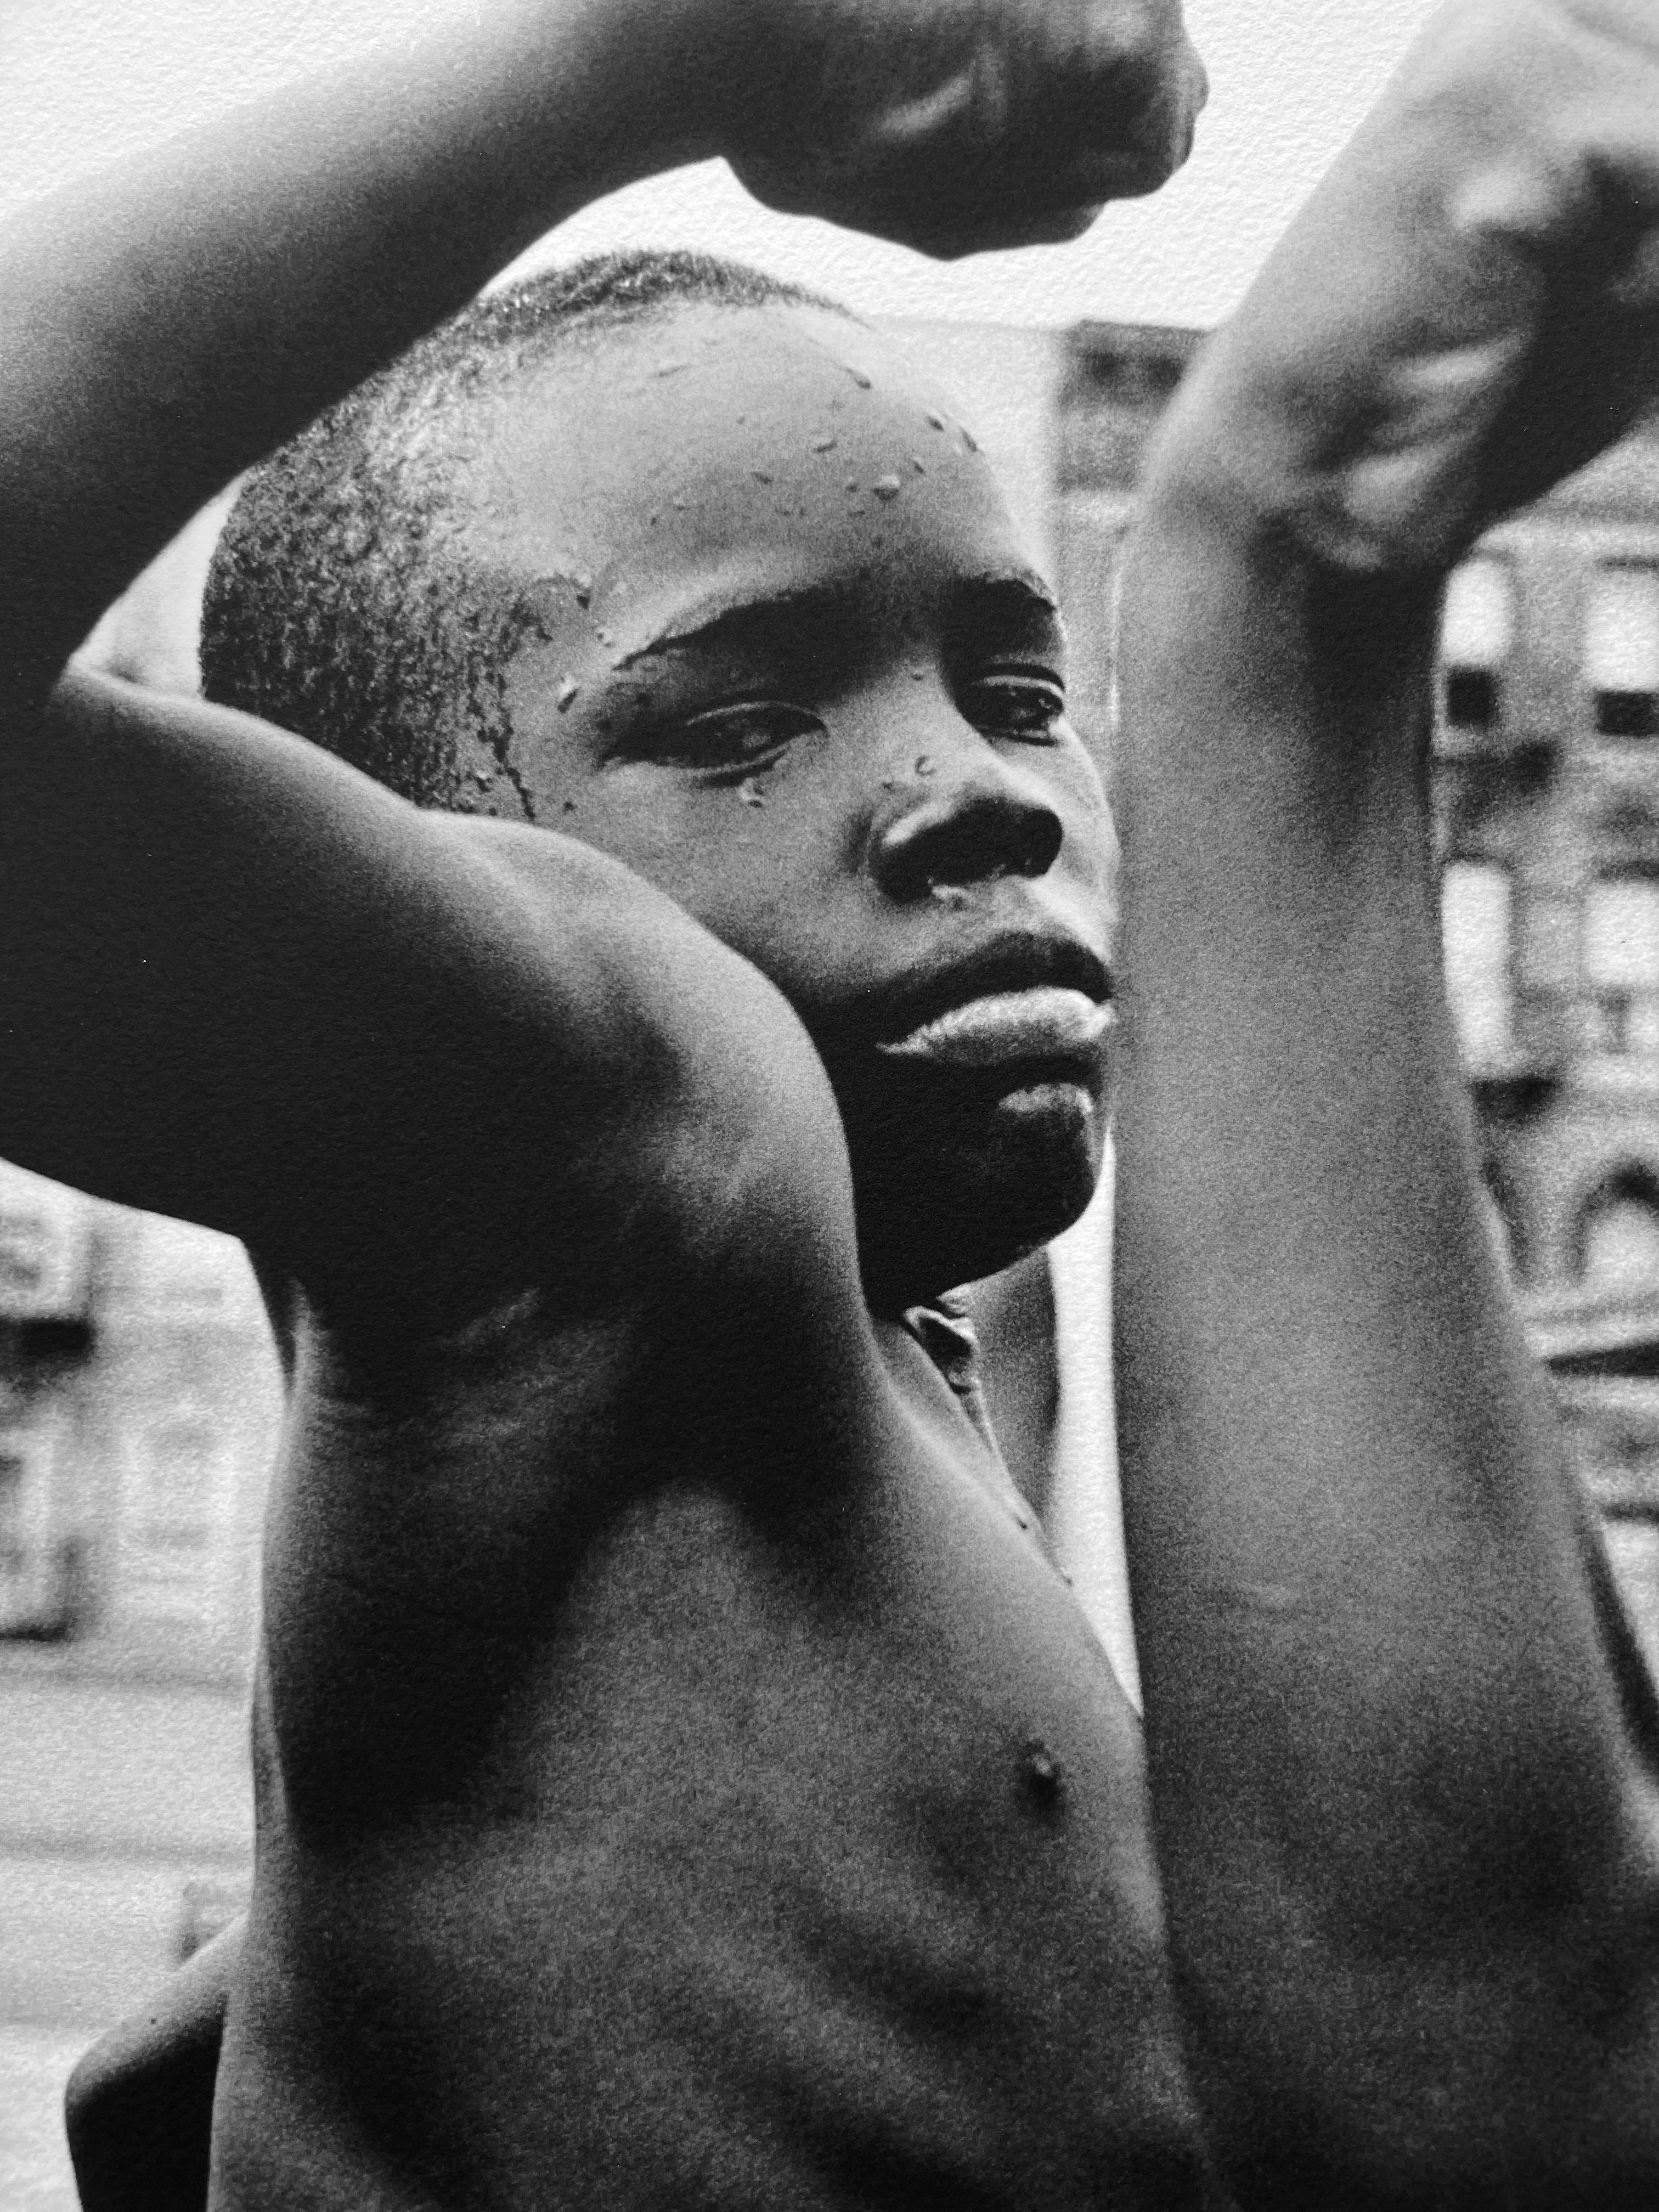 Muscle Boy, New York City, African American Children in Harlem 1960s, Limited Ed - Photograph by Leonard Freed